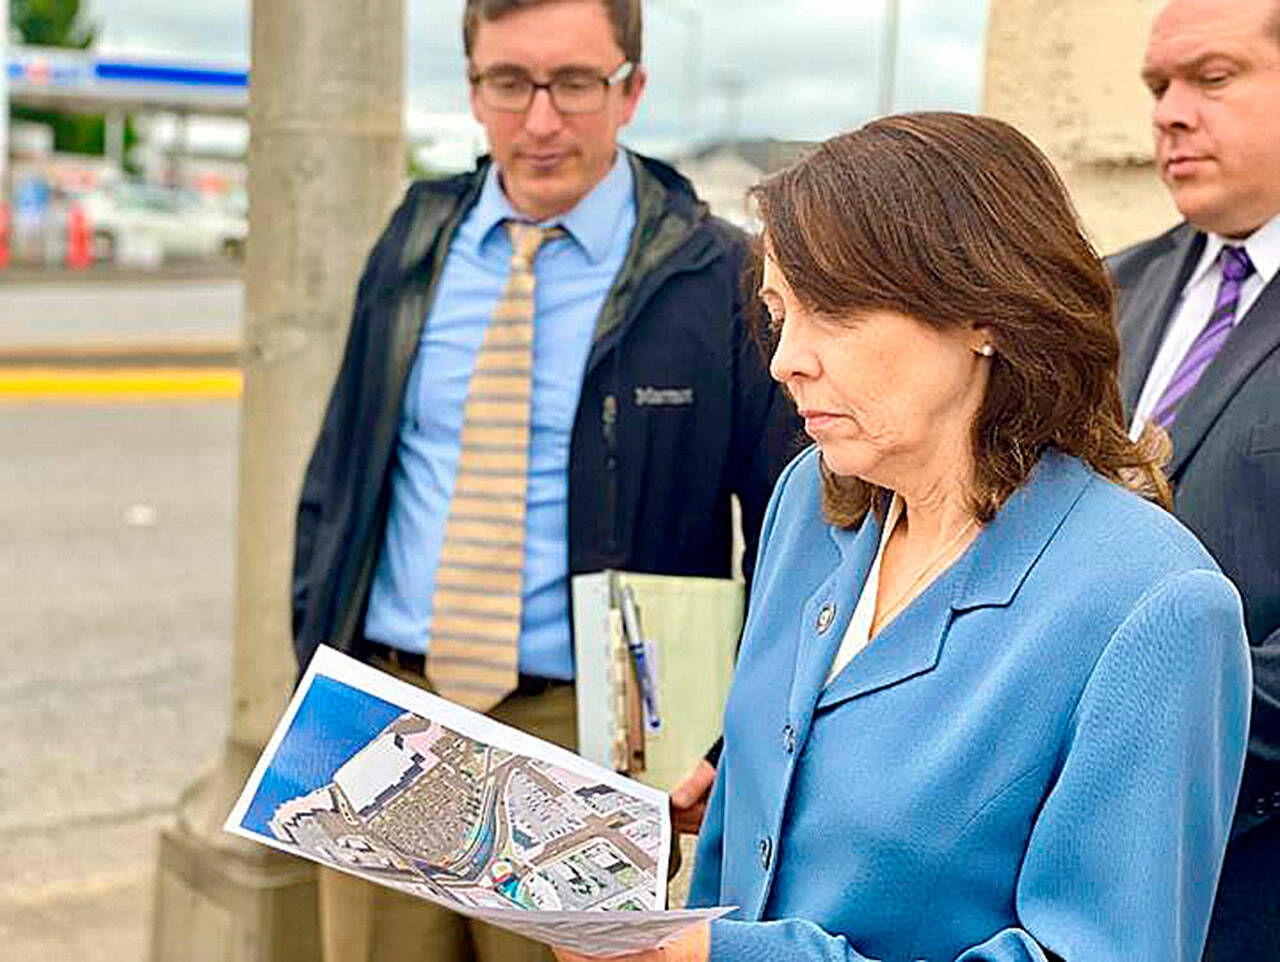 Courtesy of sen. Maria Cantwell 
Sen. Maria Cantwell got an on-the-scene view of the East Aberdeen rail separation project area in June. Behind her are former Aberdeen City Engineer Kris Koski and Hoquiam Mayor Ben Winkelman.